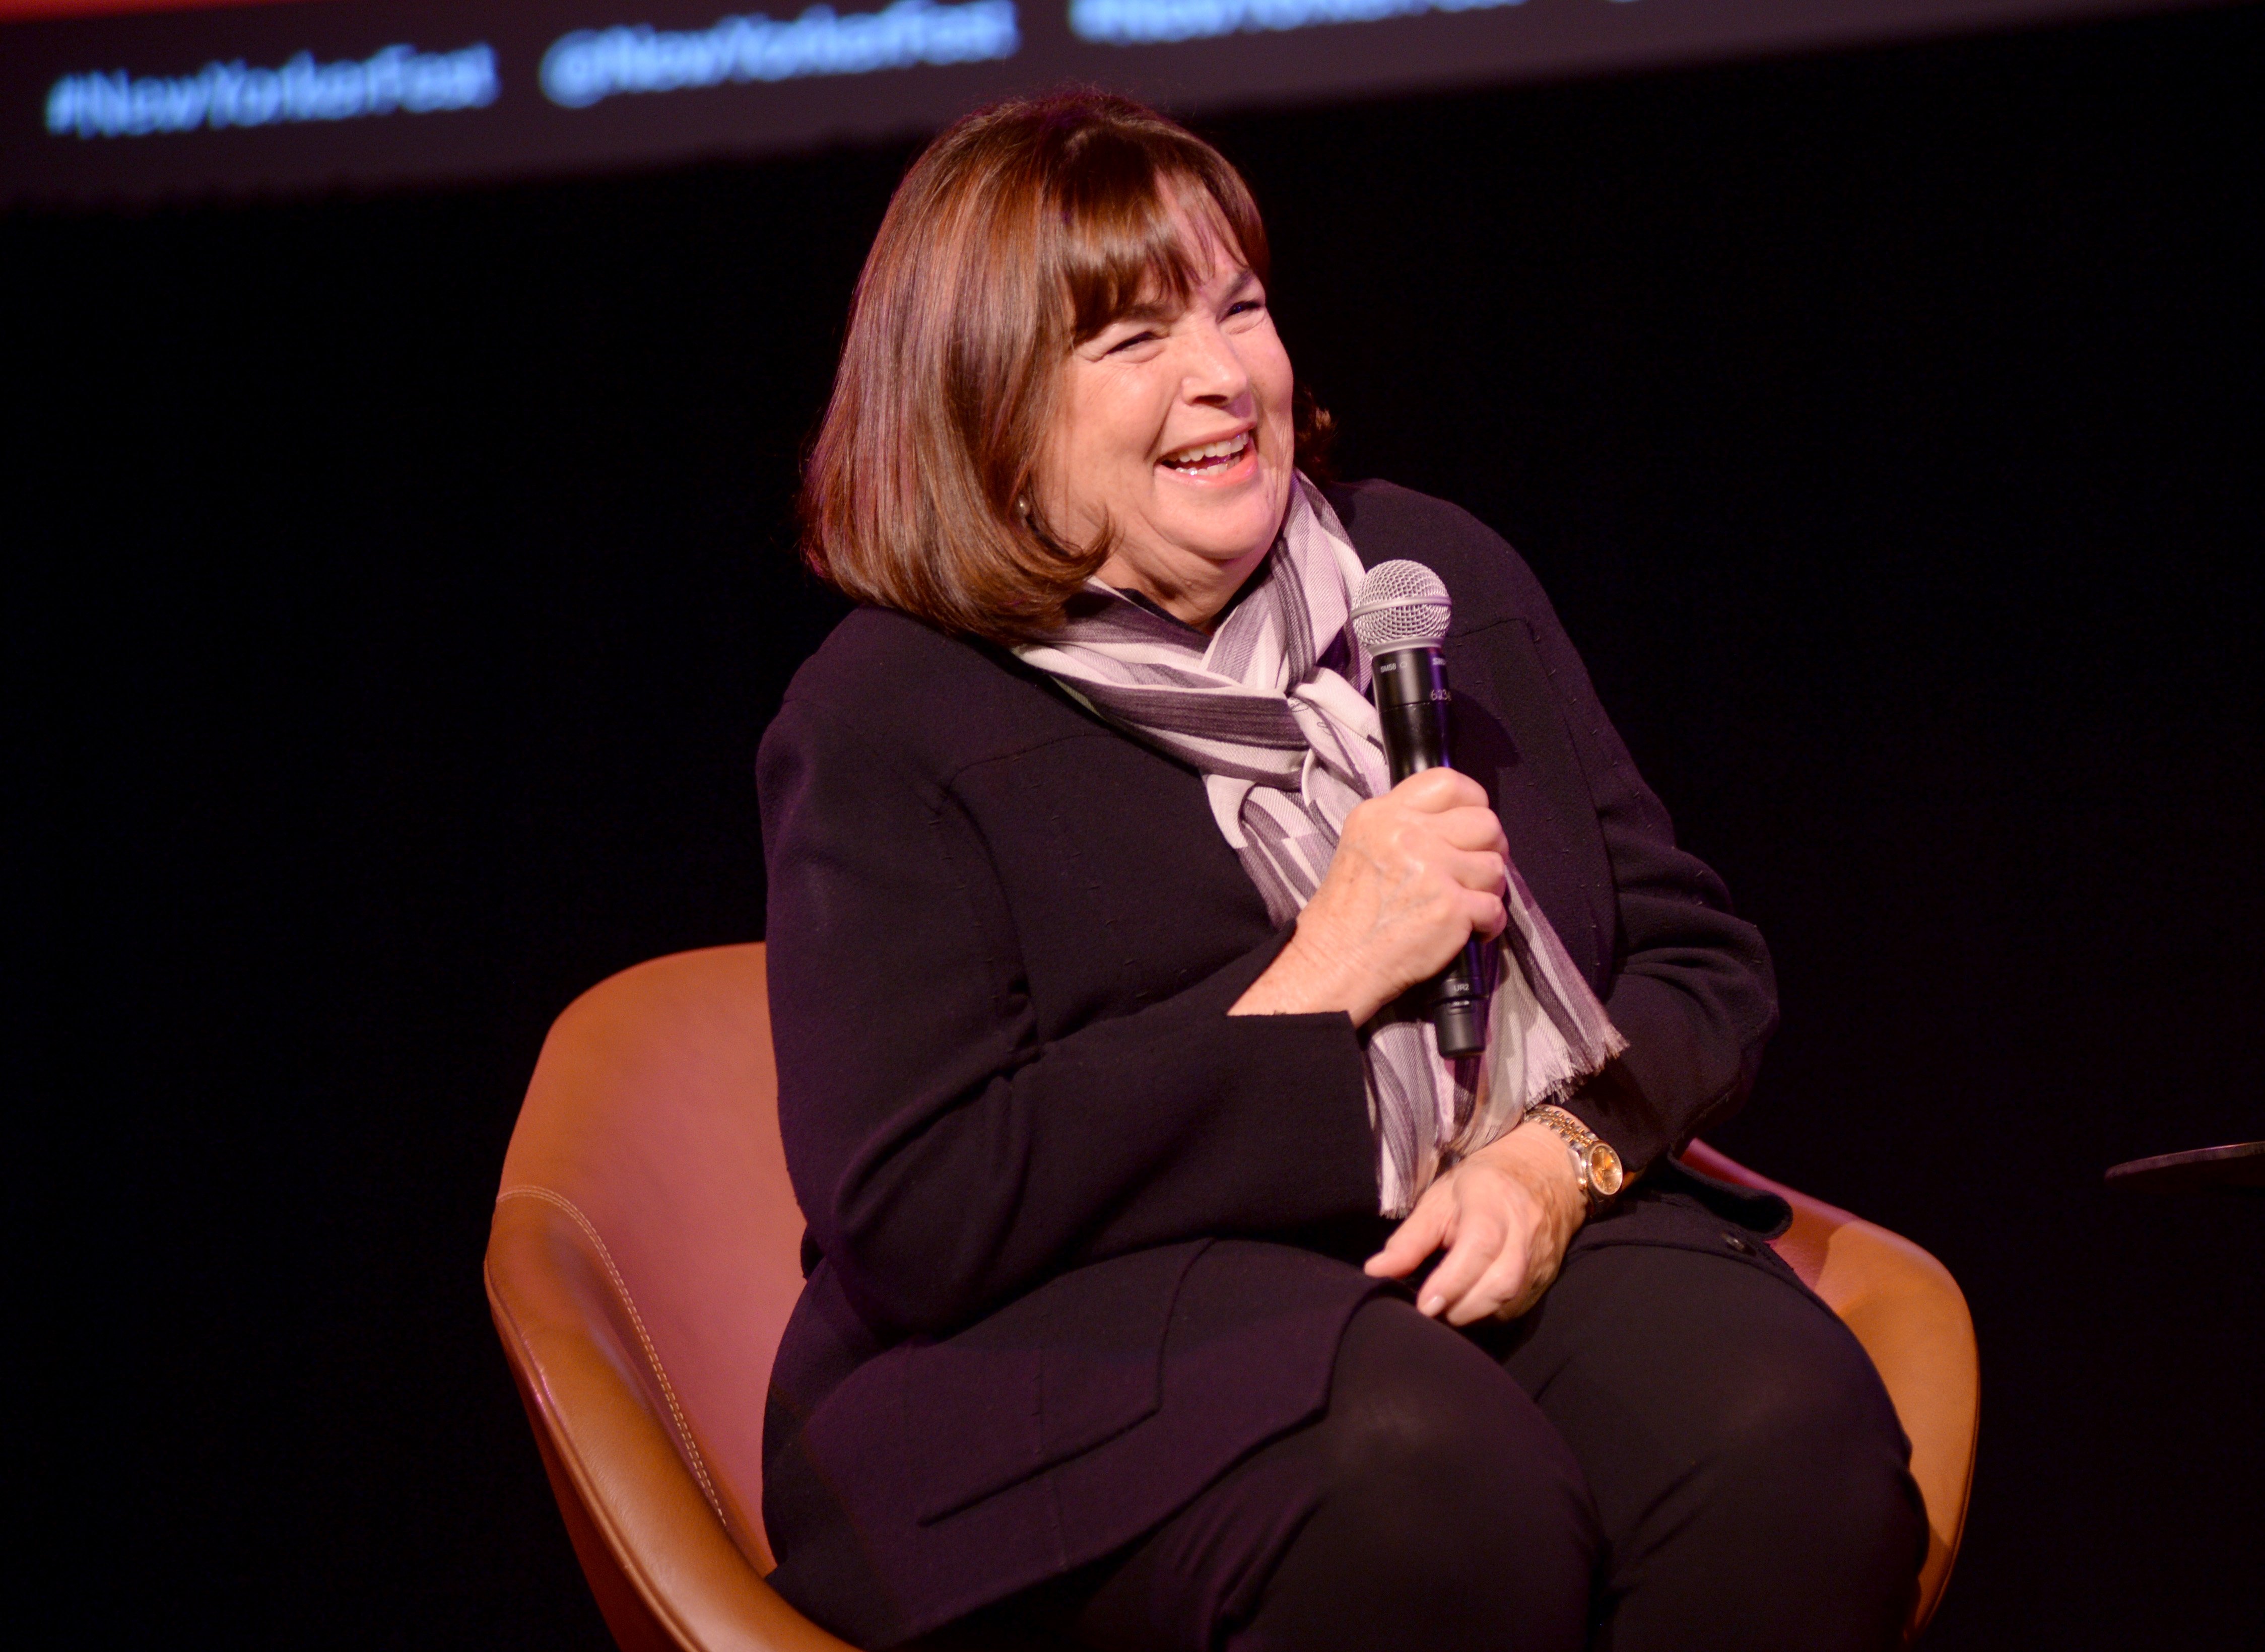 'Barefoot Contessa' star Ina Garten addresses an audience while sitting in an orange seat with a microphone in hand